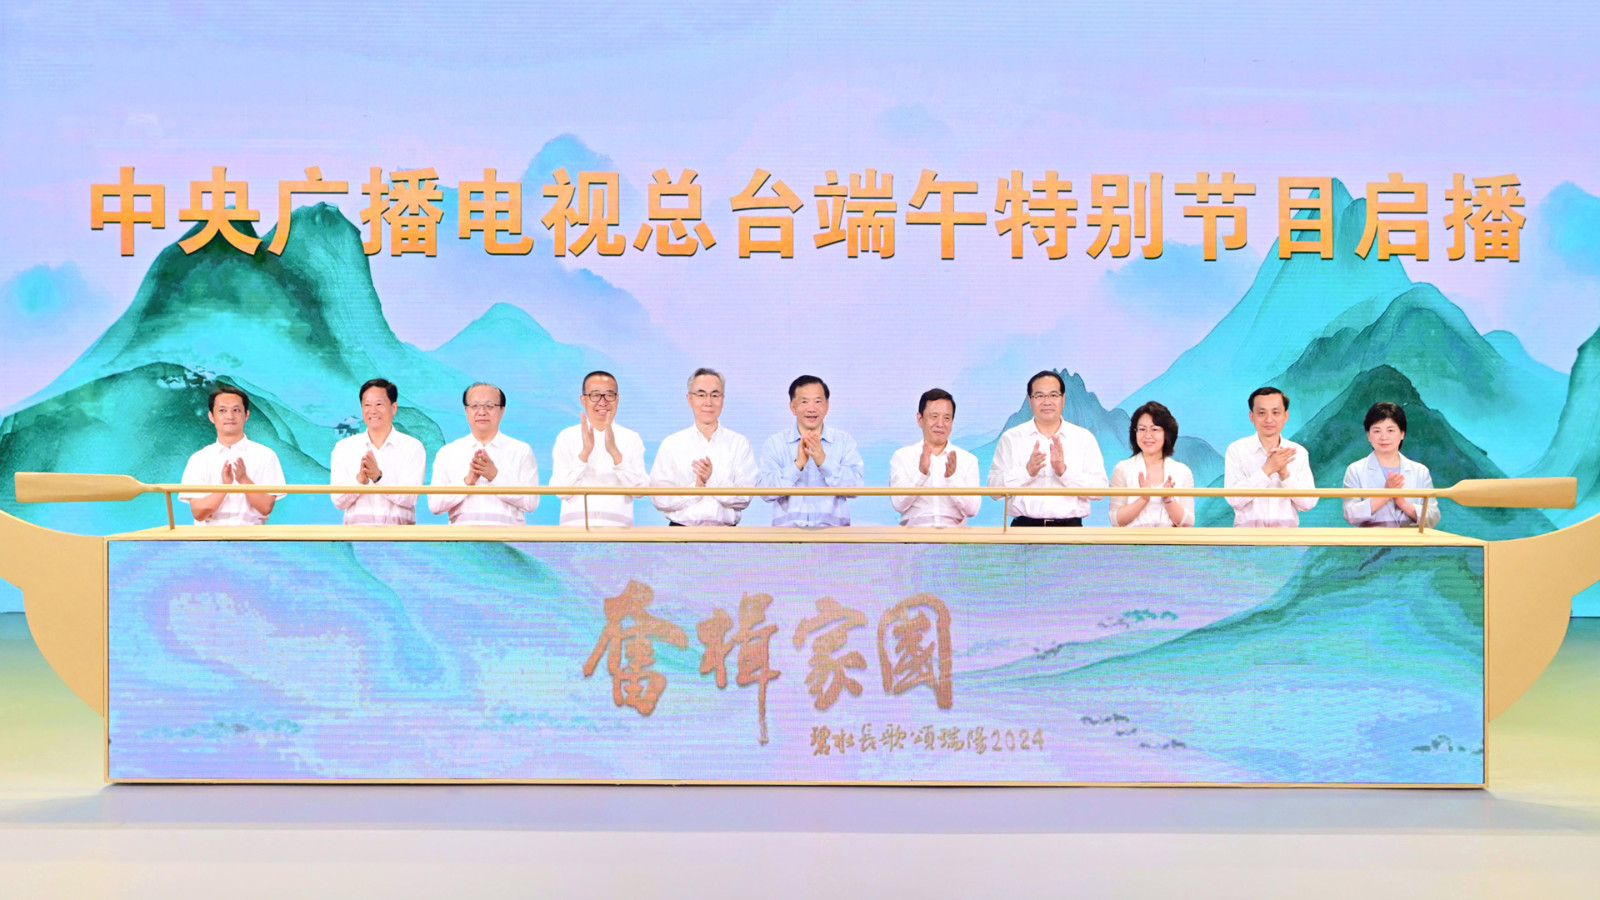 CMG President Shen Haixiong (C) and other guests applaud the launch of the group's Dragon Boat Festival special, June 6, 2024. /CMG